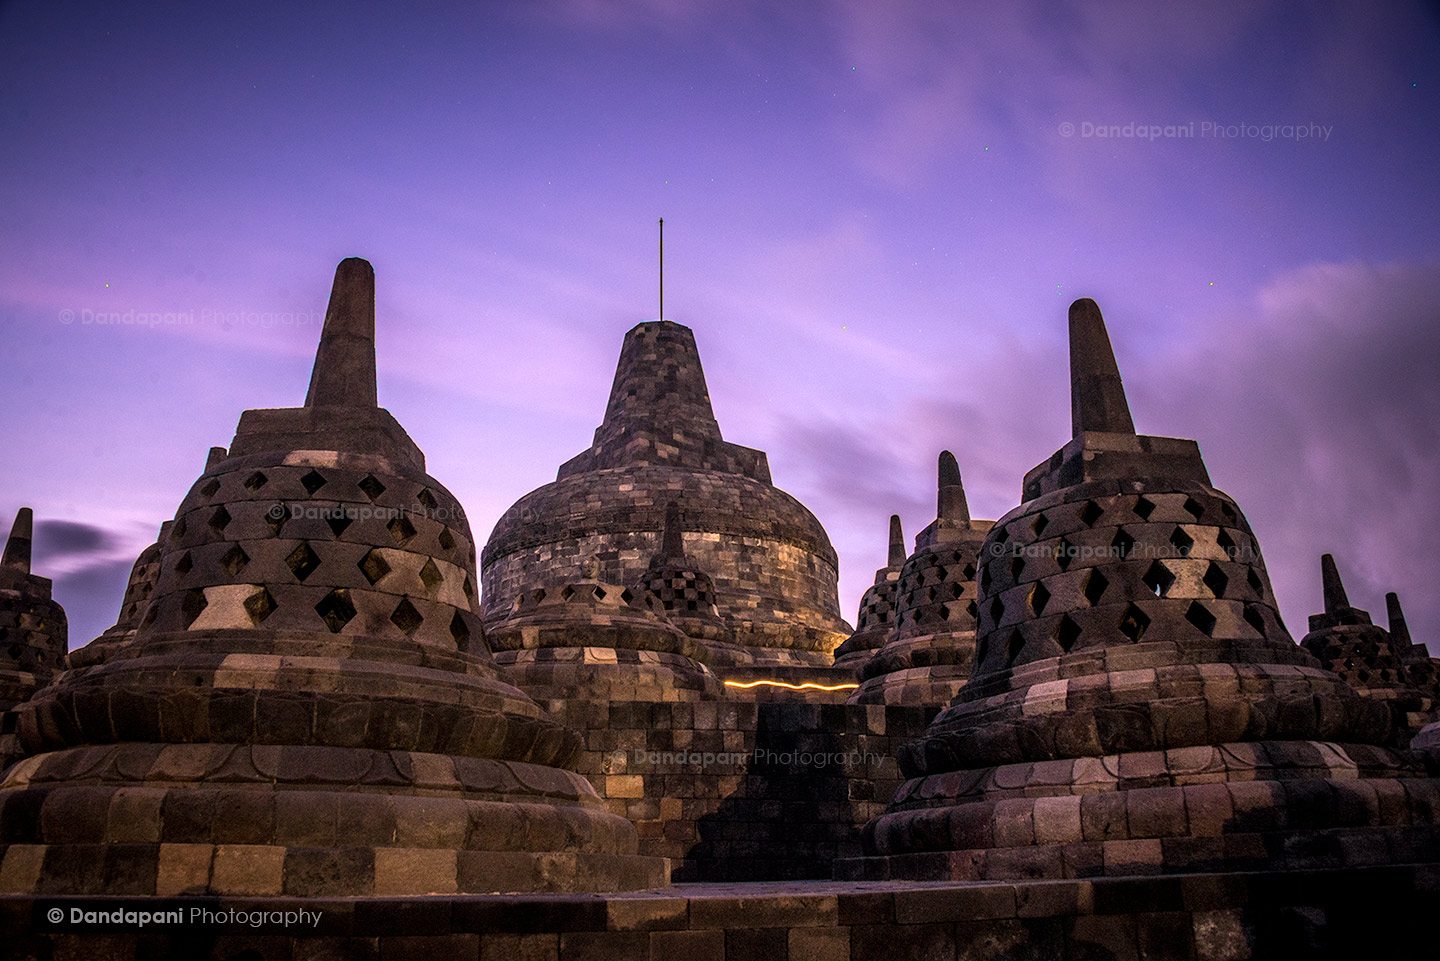 The spectacular Borobudur Temple at pre-dawn lit by a full moon. Gorgeous colors!